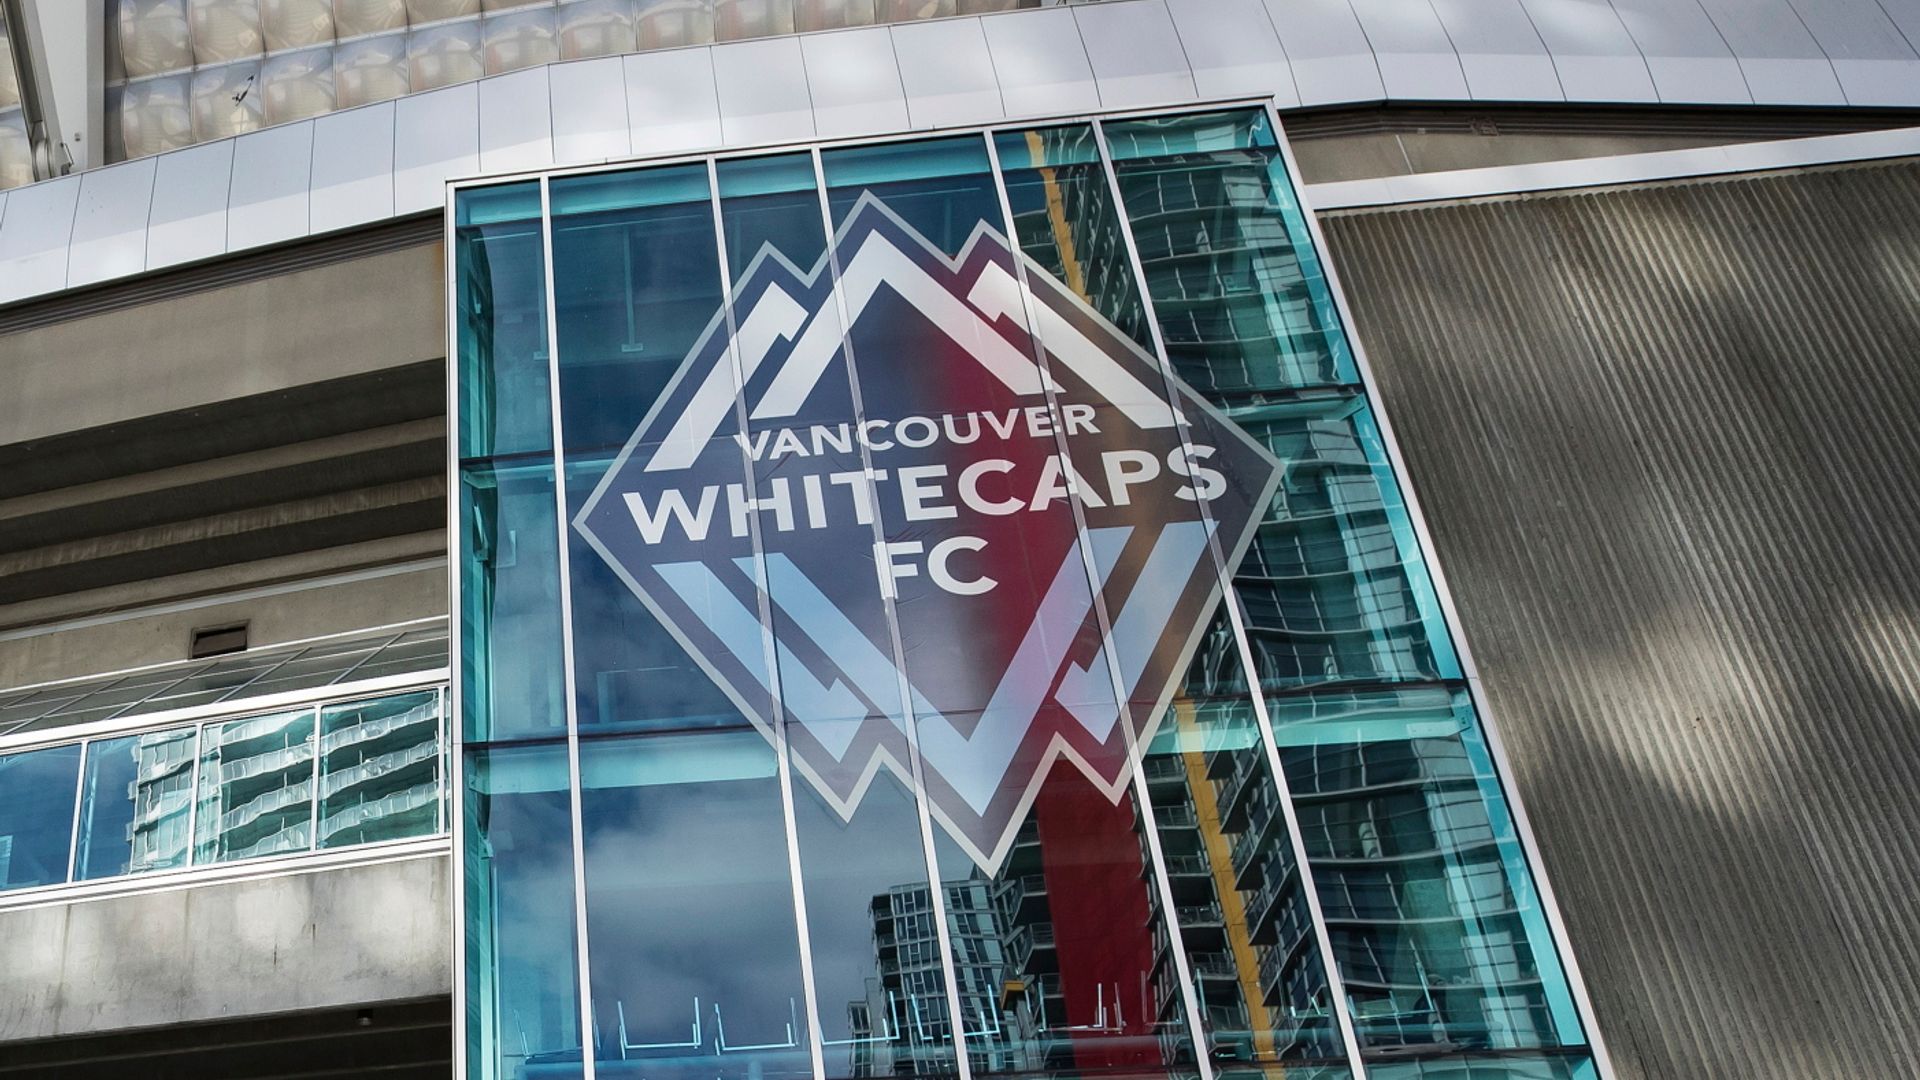 Three Whitecaps players victims of alleged racist attack